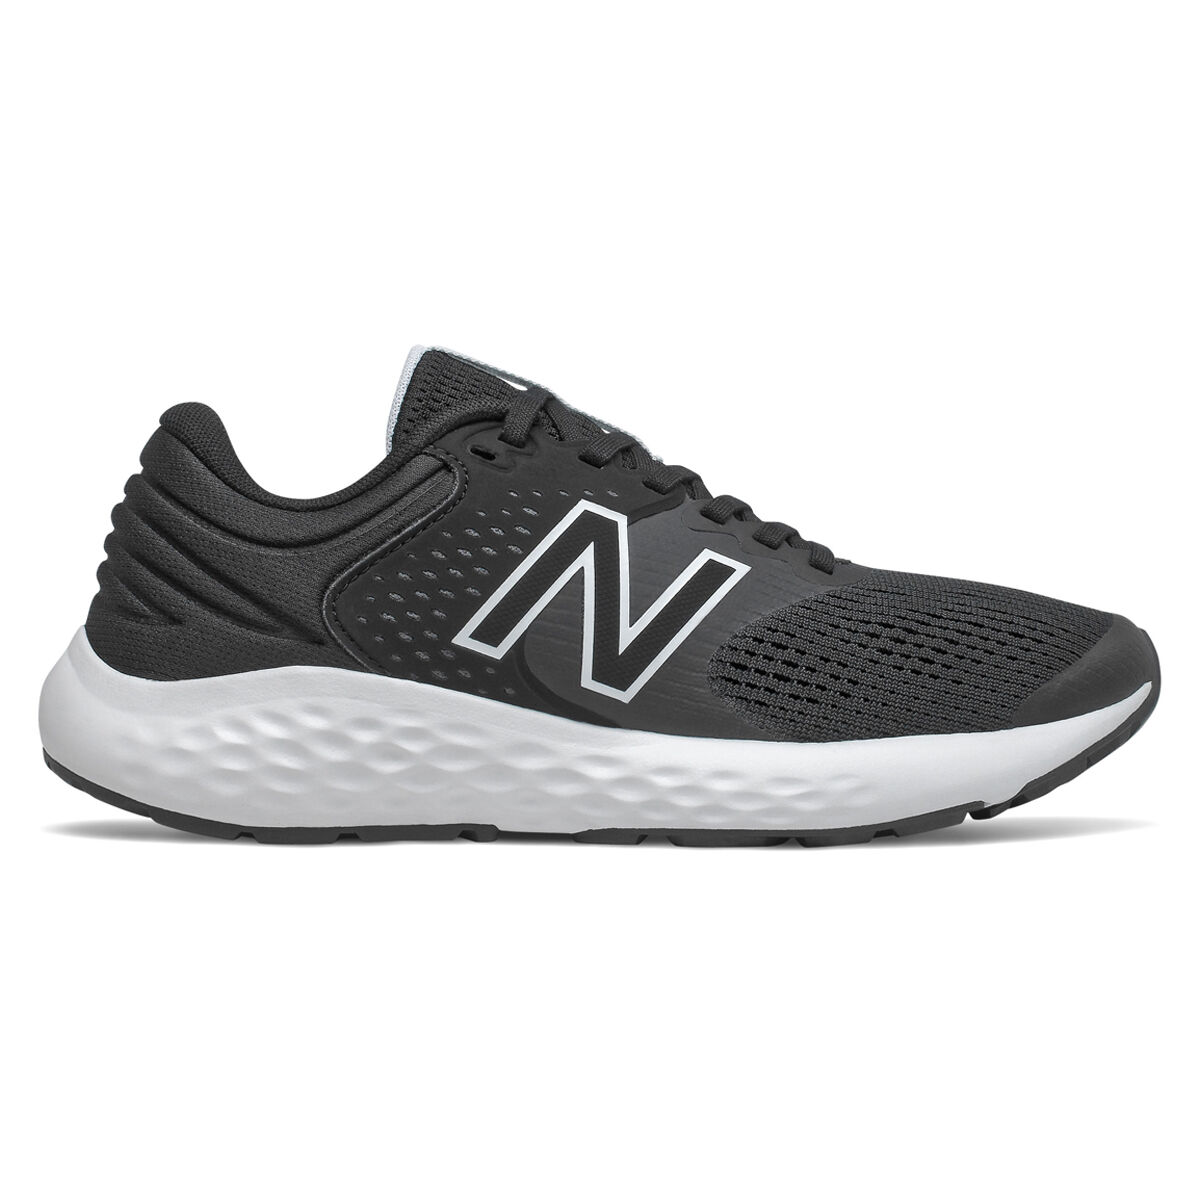 New Balance Shoes Clothing Accessories Rebel